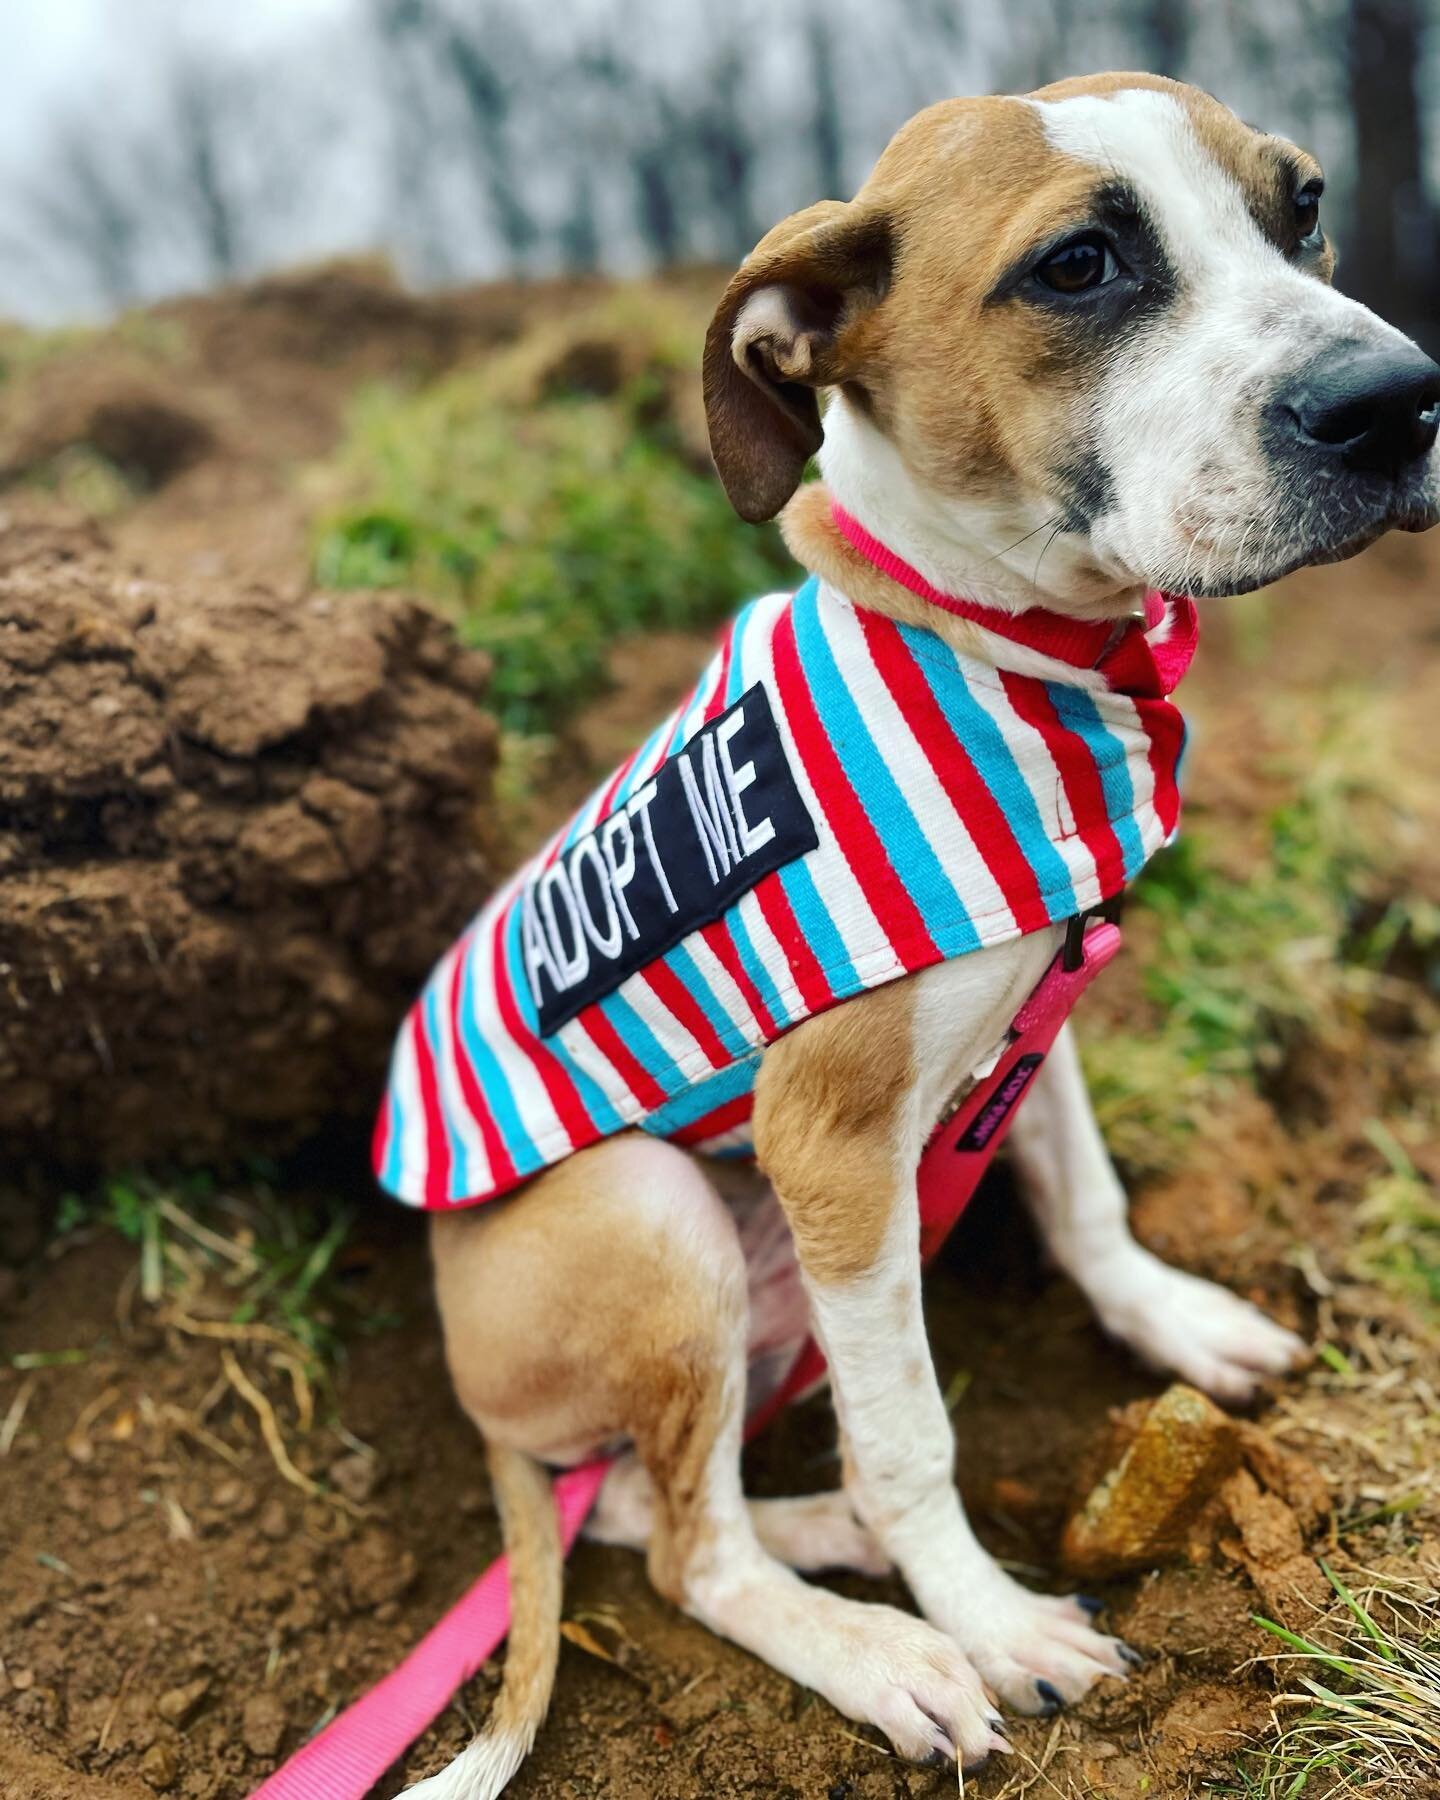 🇲🇽 Our good friends at @xolosarapes added HALFWAY HOME sarapes with their ADOPT ME slogan sarapes.

🇲🇽 Our foster Fern looks great in the size small!

🇲🇽She stayed warm &amp; dry in her sarape on this rainy, chilly morning.

🇲🇽Code: erinmurph